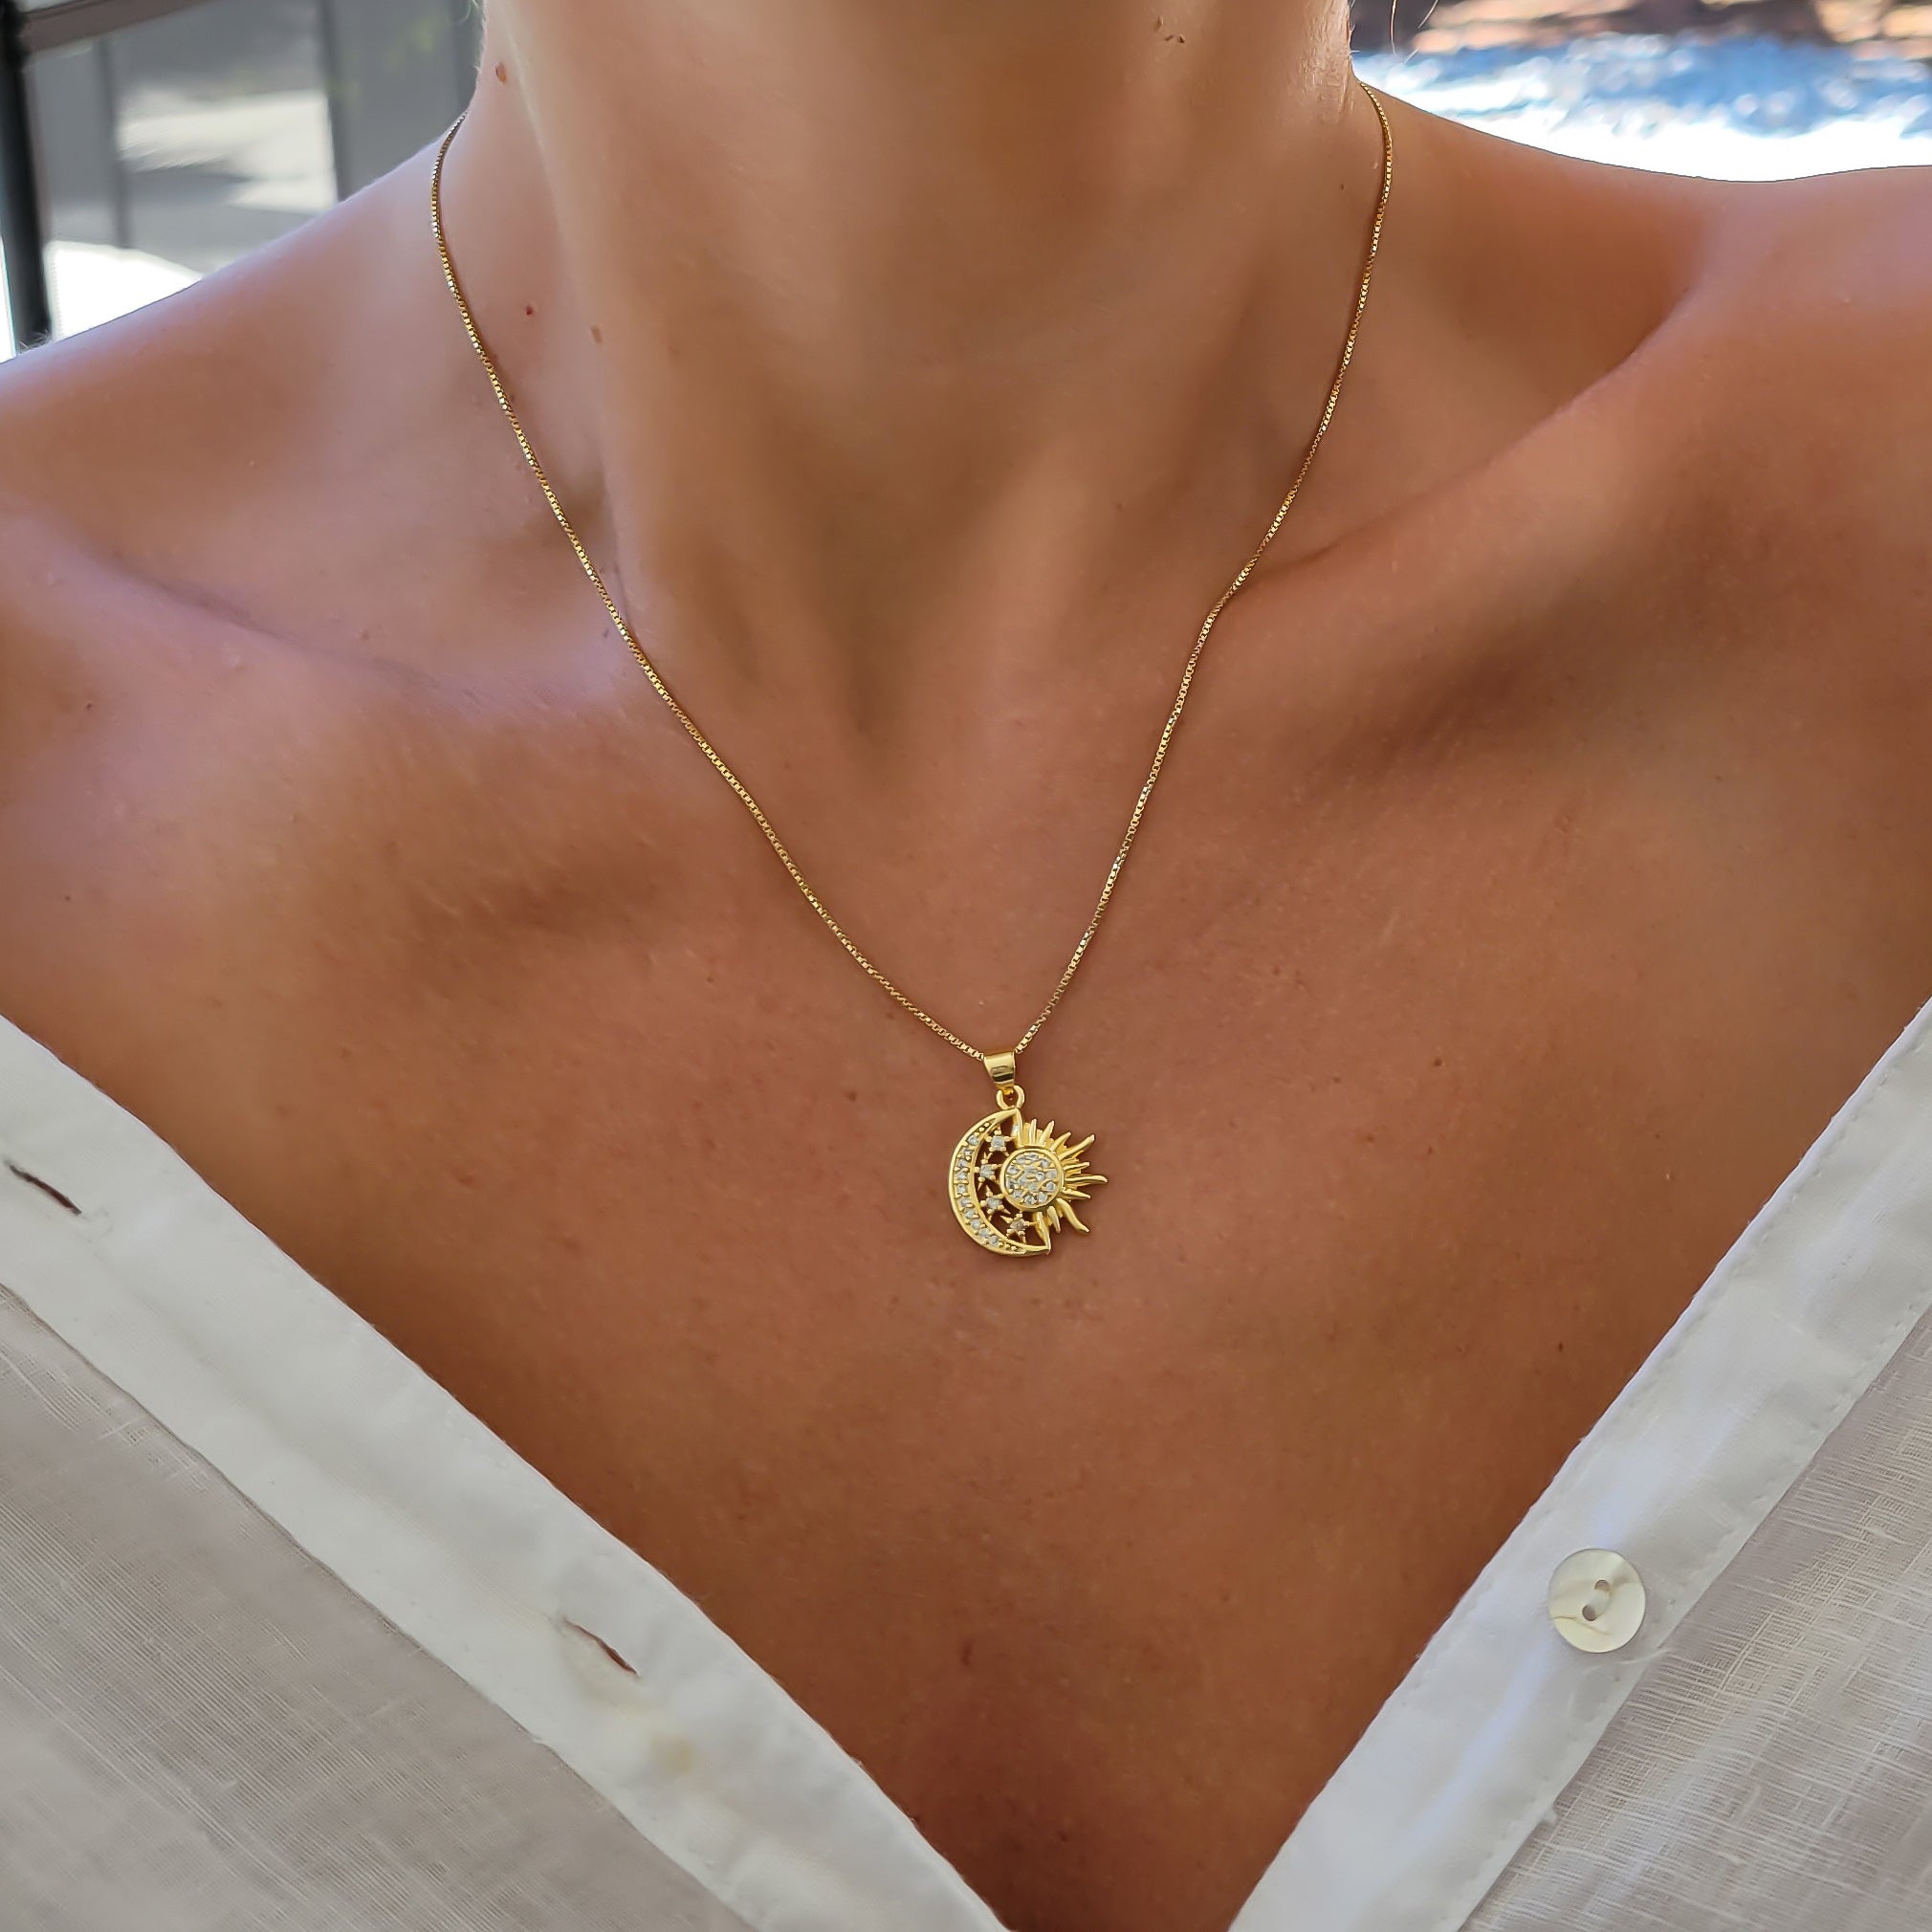 Woman Wearing Gold Filled Sun and Moon Necklace